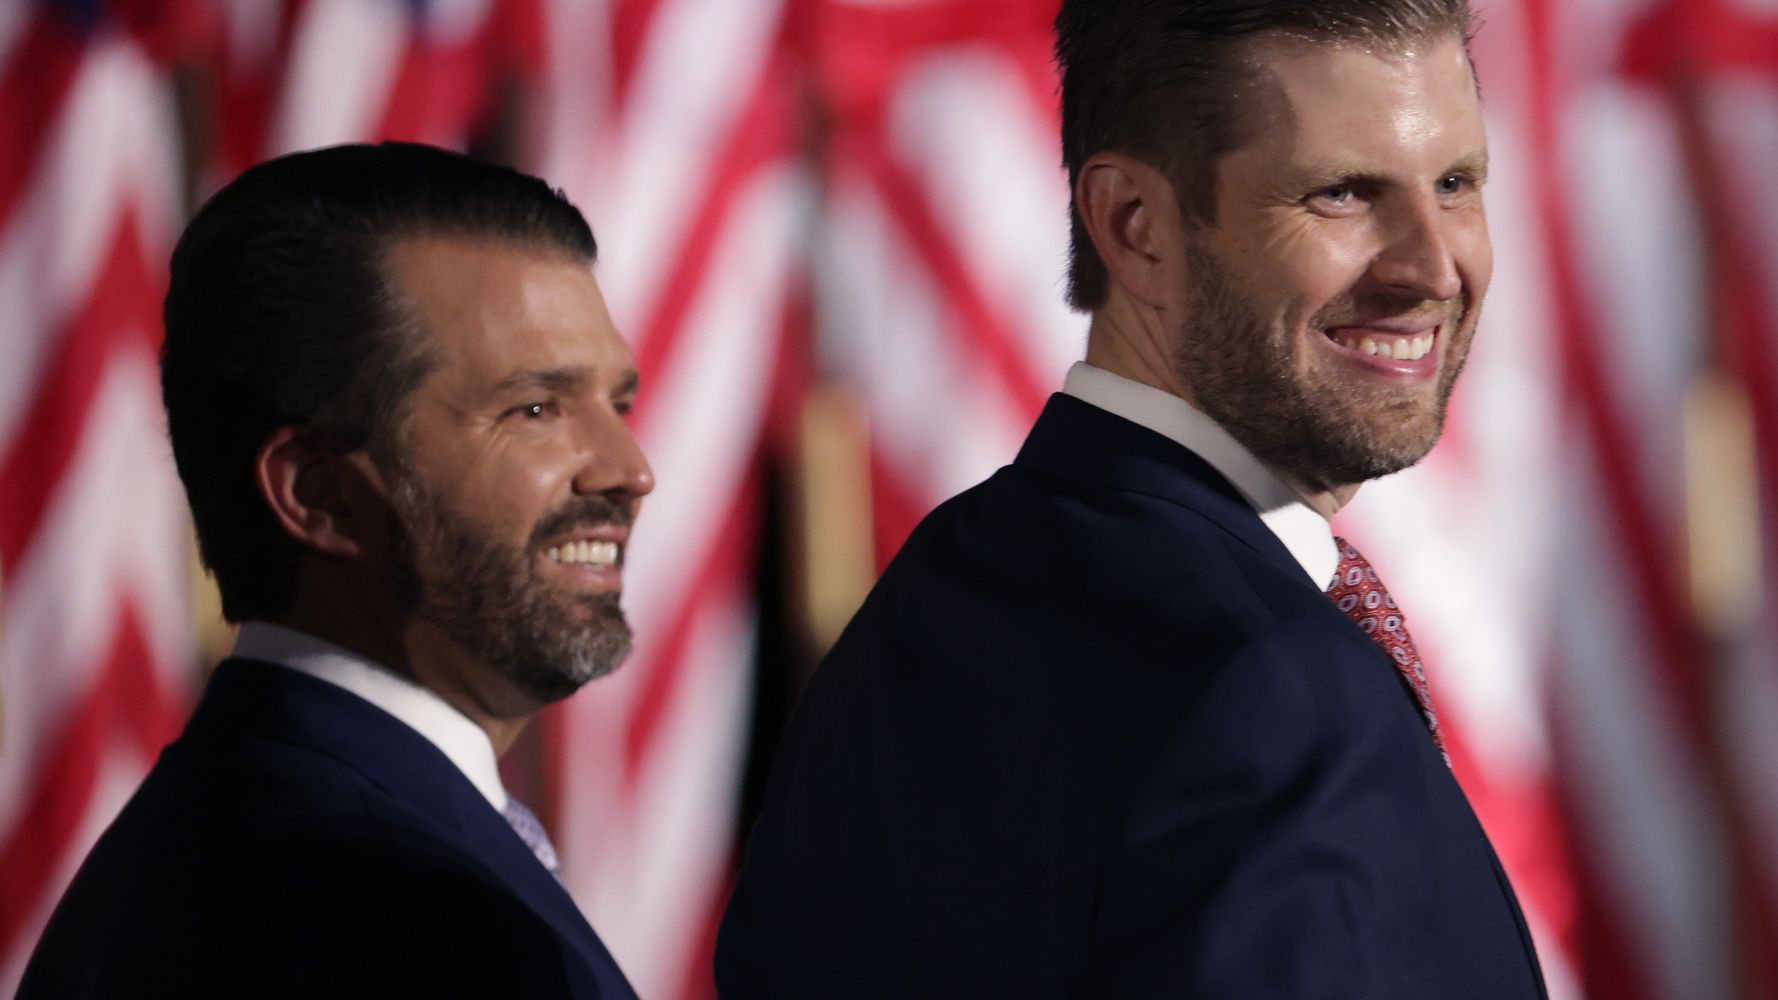 Donald Trump’s Adult Sons Spreading Election Disinformation To Discredit Vote